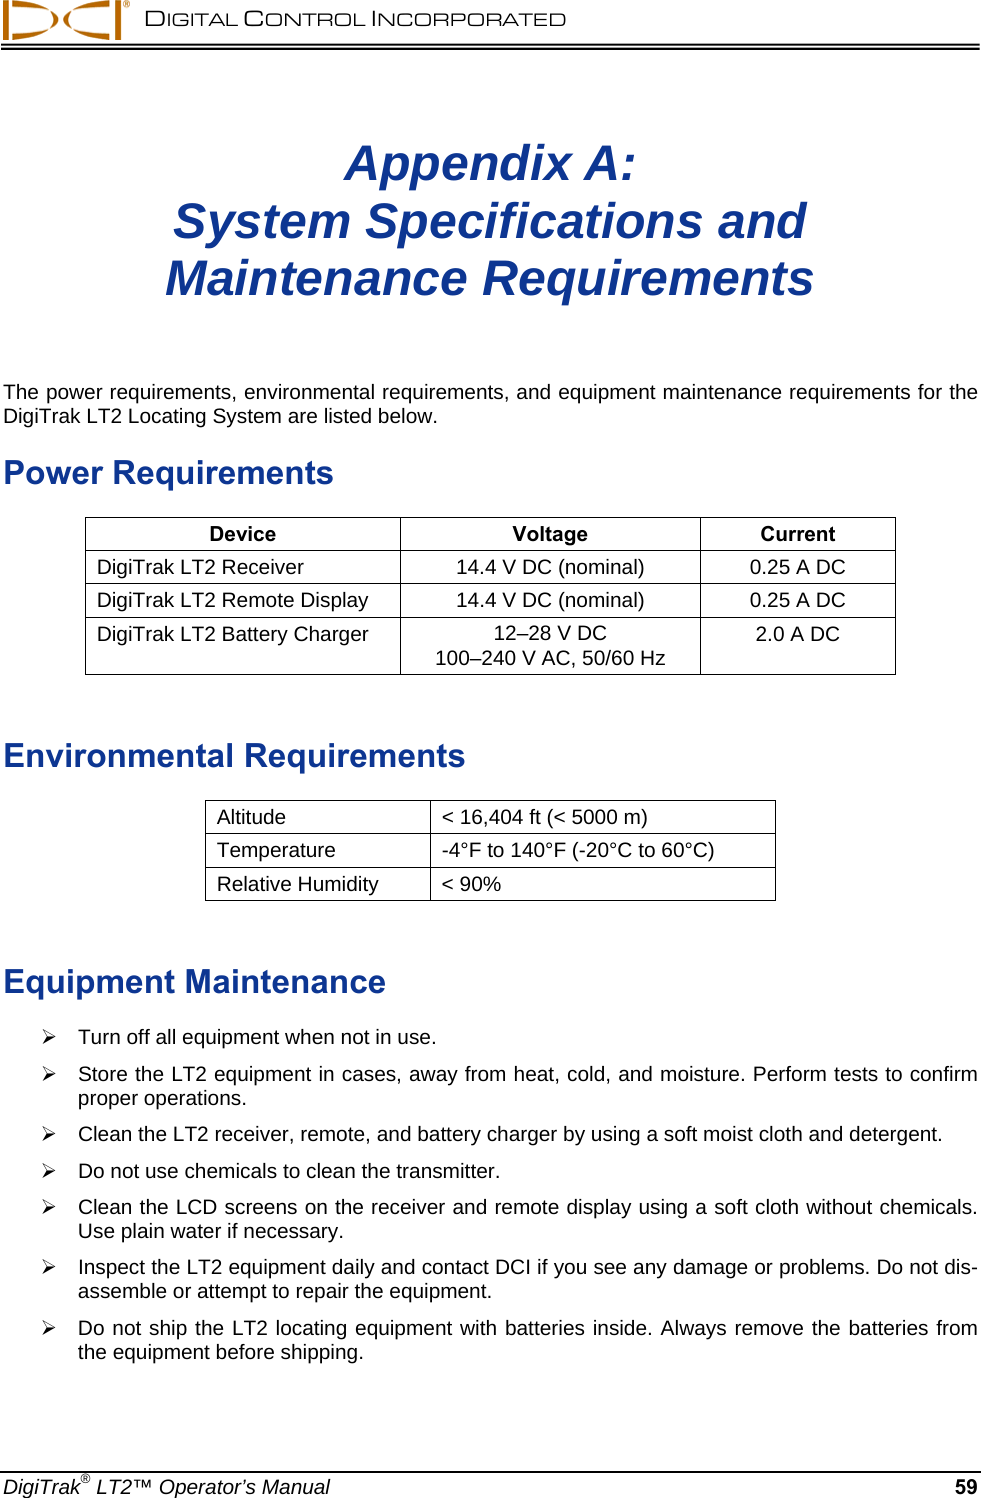   DIGITAL CONTROL INCORPORATED   Appendix A:  System Specifications and  Maintenance Requirements  The power requirements, environmental requirements, and equipment maintenance requirements for the DigiTrak LT2 Locating System are listed below. Power Requirements Device Voltage Current DigiTrak LT2 Receiver  14.4 V DC (nominal)  0.25 A DC DigiTrak LT2 Remote Display  14.4 V DC (nominal)  0.25 A DC DigiTrak LT2 Battery Charger  12–28 V DC  100–240 V AC, 50/60 Hz  2.0 A DC  Environmental Requirements Altitude  &lt; 16,404 ft (&lt; 5000 m) Temperature  -4°F to 140°F (-20°C to 60°C) Relative Humidity  &lt; 90%  Equipment Maintenance   Turn off all equipment when not in use.    Store the LT2 equipment in cases, away from heat, cold, and moisture. Perform tests to confirm proper operations.     Clean the LT2 receiver, remote, and battery charger by using a soft moist cloth and detergent.   Do not use chemicals to clean the transmitter.     Clean the LCD screens on the receiver and remote display using a soft cloth without chemicals. Use plain water if necessary.   Inspect the LT2 equipment daily and contact DCI if you see any damage or problems. Do not dis-assemble or attempt to repair the equipment.   Do not ship the LT2 locating equipment with batteries inside. Always remove the batteries from the equipment before shipping.  DigiTrak® LT2™ Operator’s Manual 59 